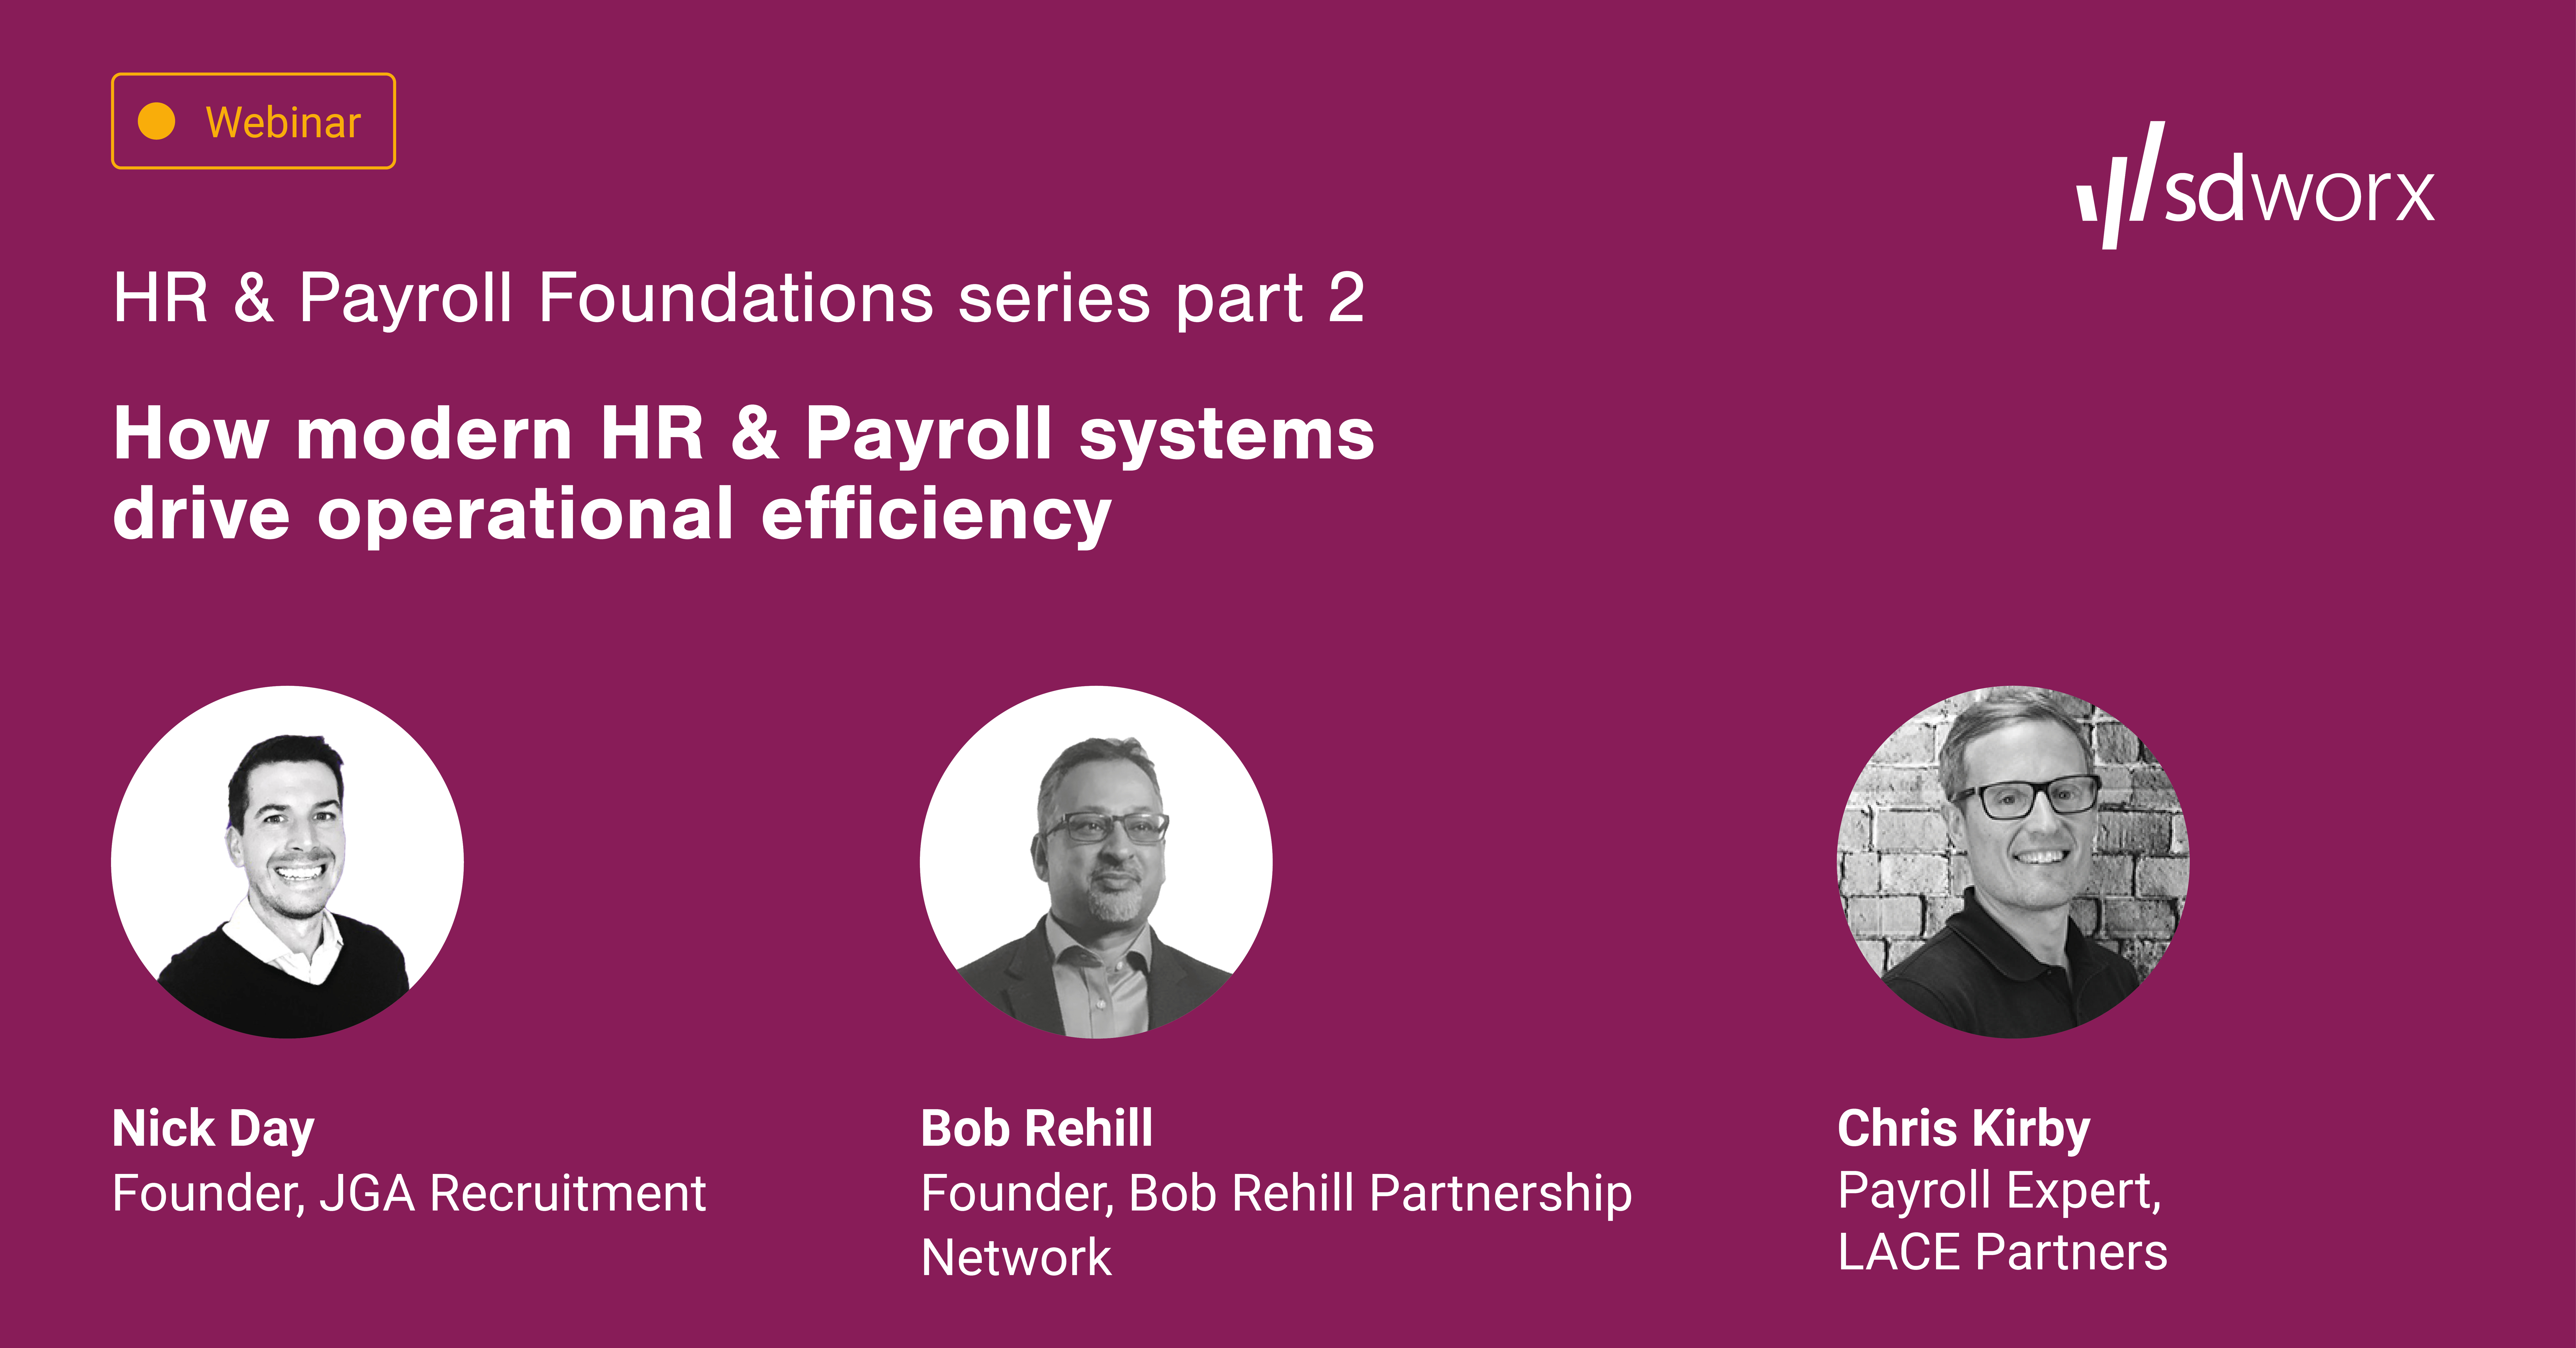 Payroll Foundations series part 2